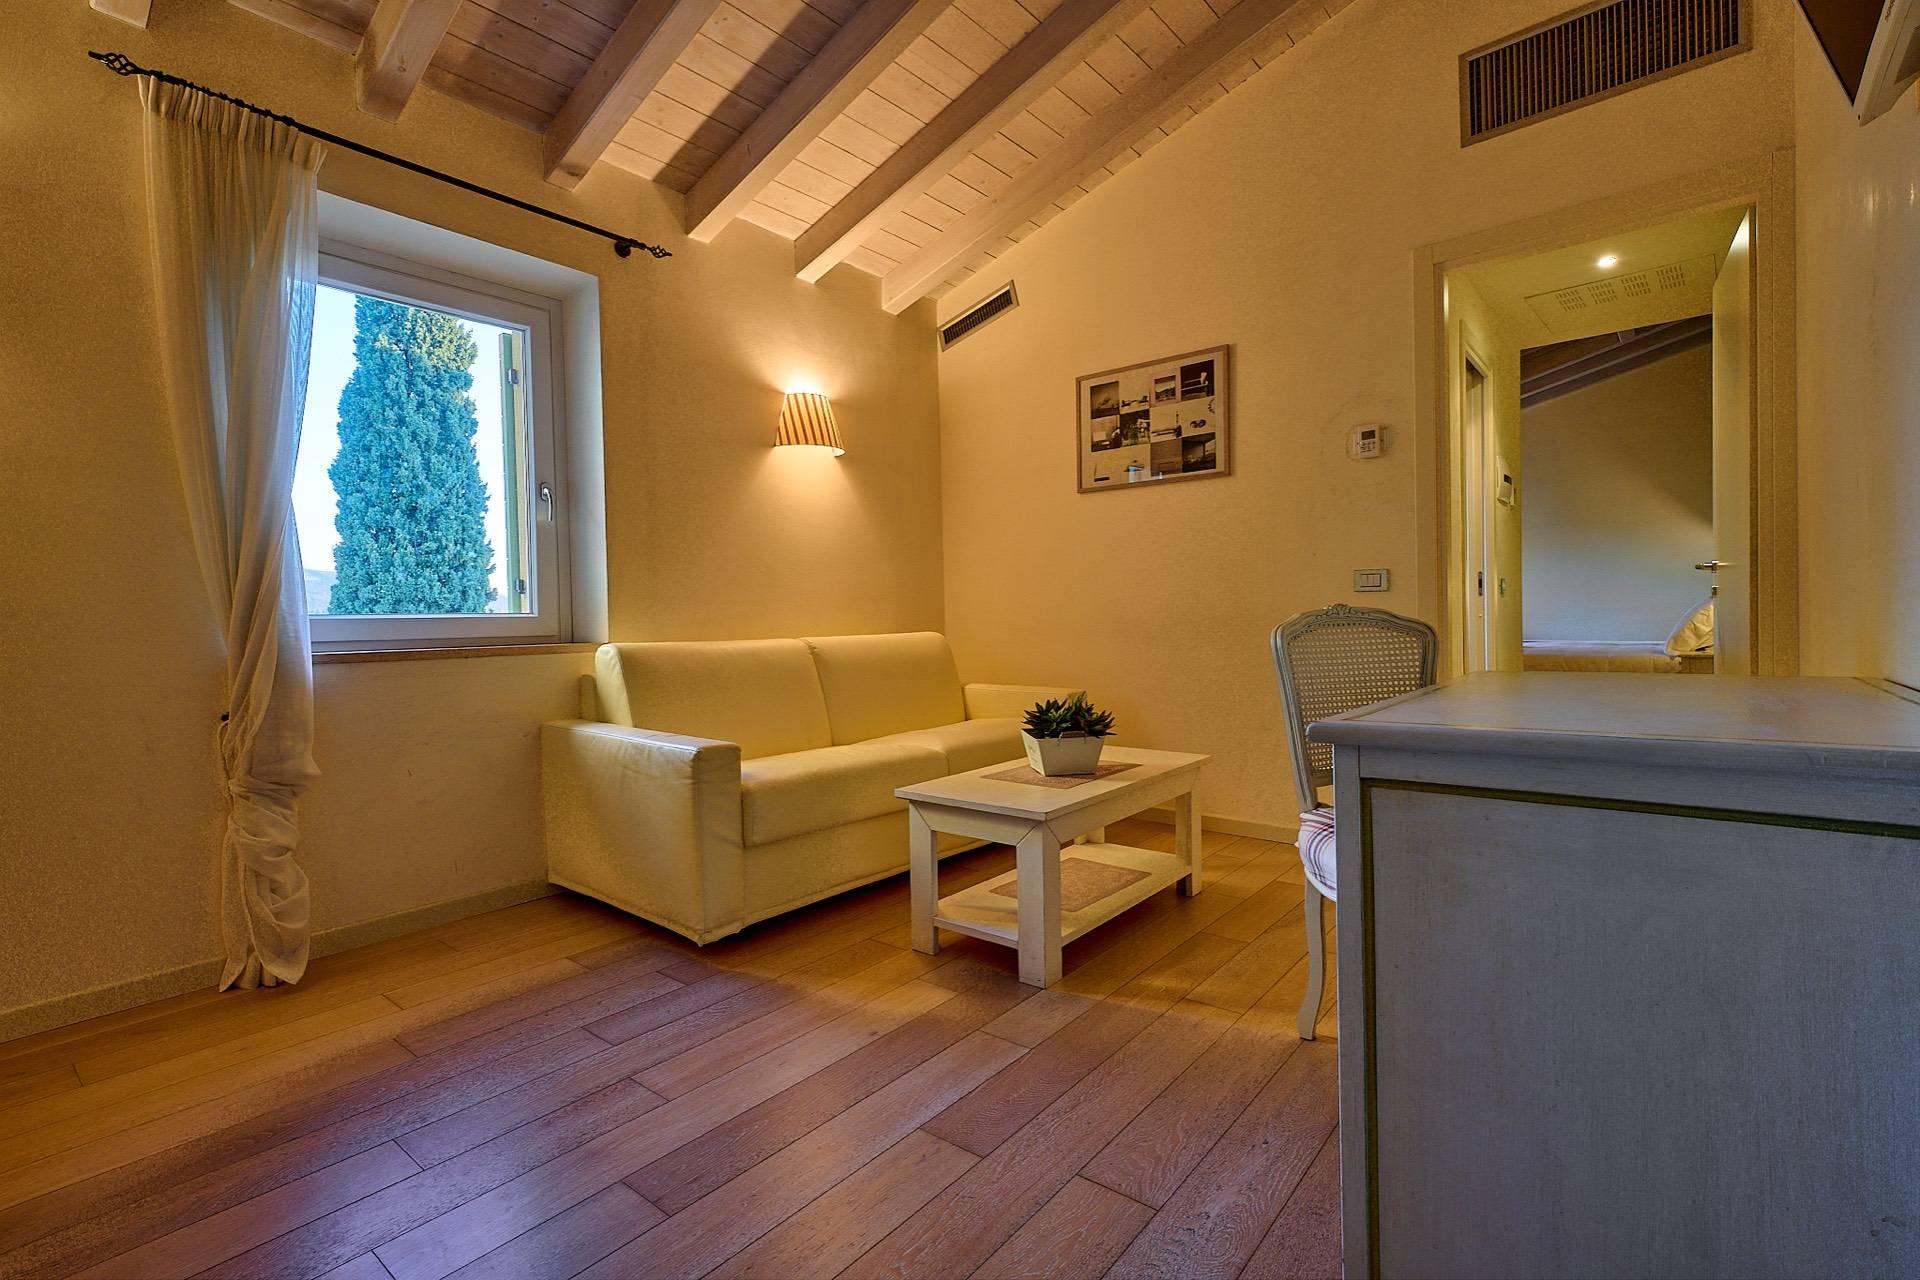 Villa used as charming hotel on the Valpolicella hills - 16